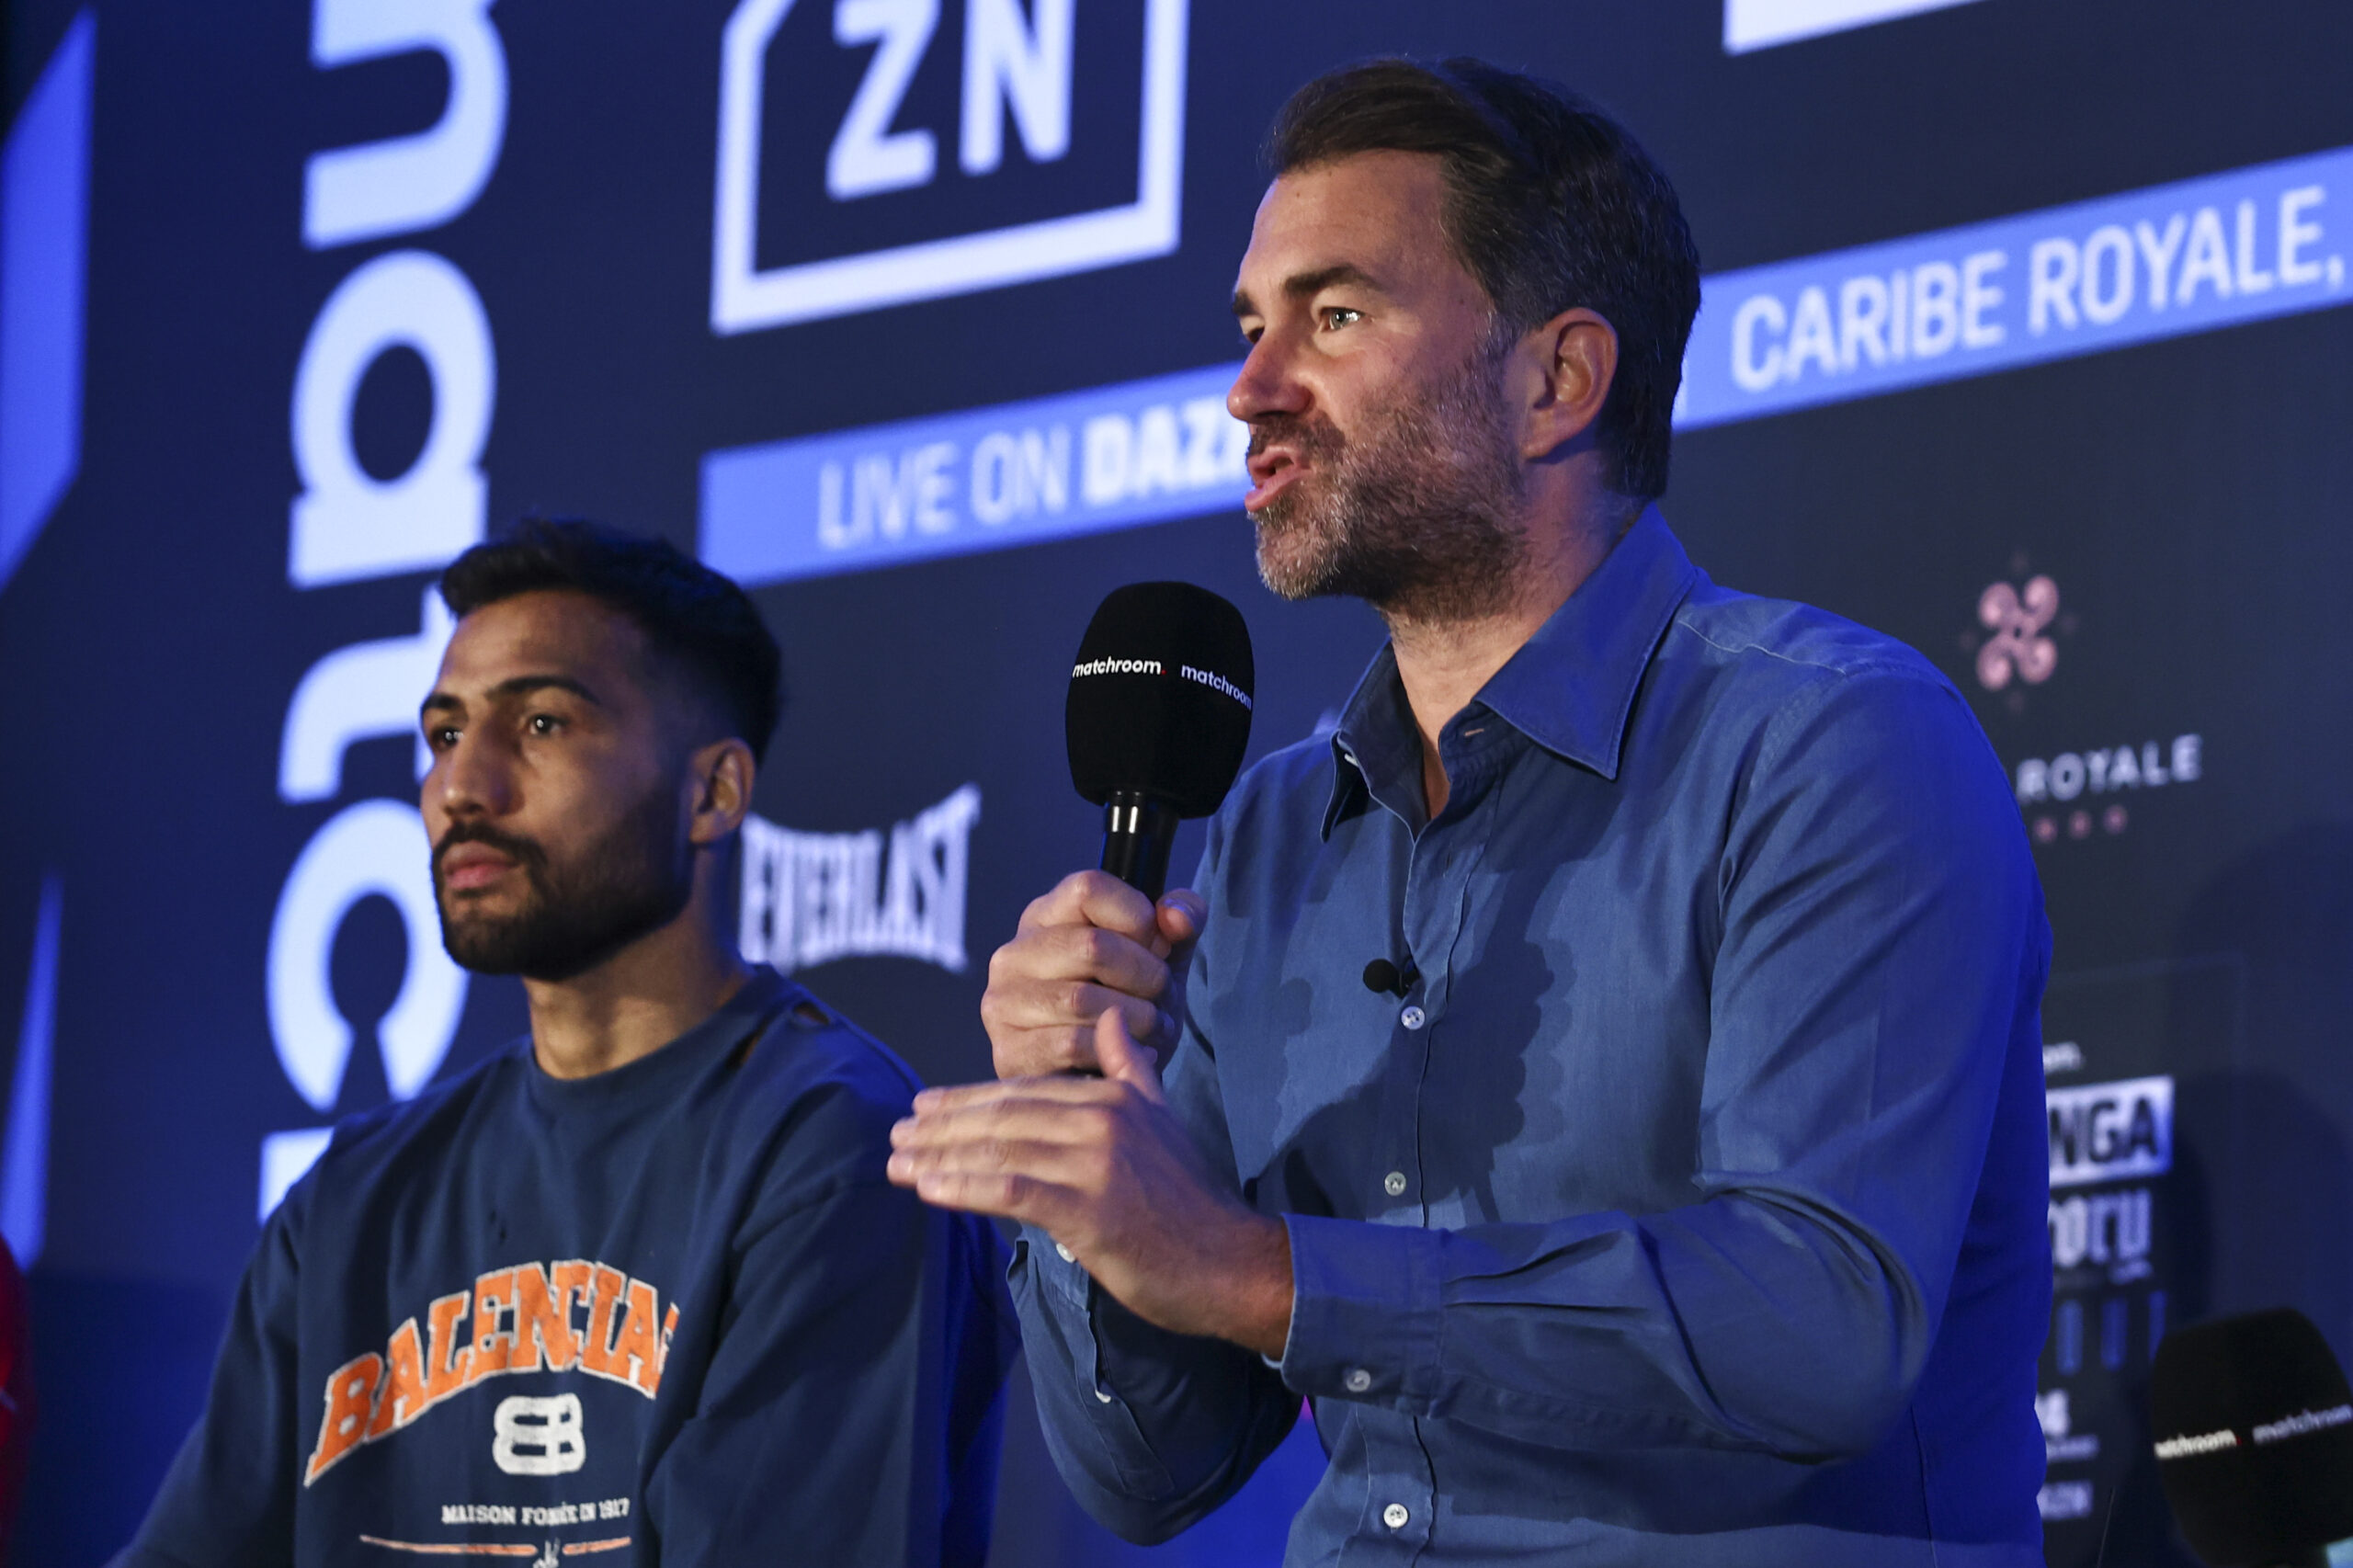 February 22, 2024; Orlando, Florida, USA; Eddie Hearn, Chairman of Matchroom Sport, speaks during the final press conference ahead of the Matchroom Boxing card on February 24, 2024 at the Caribe Royale in Orlando, Florida. (Foto: Melina Pizano/Matchroom).